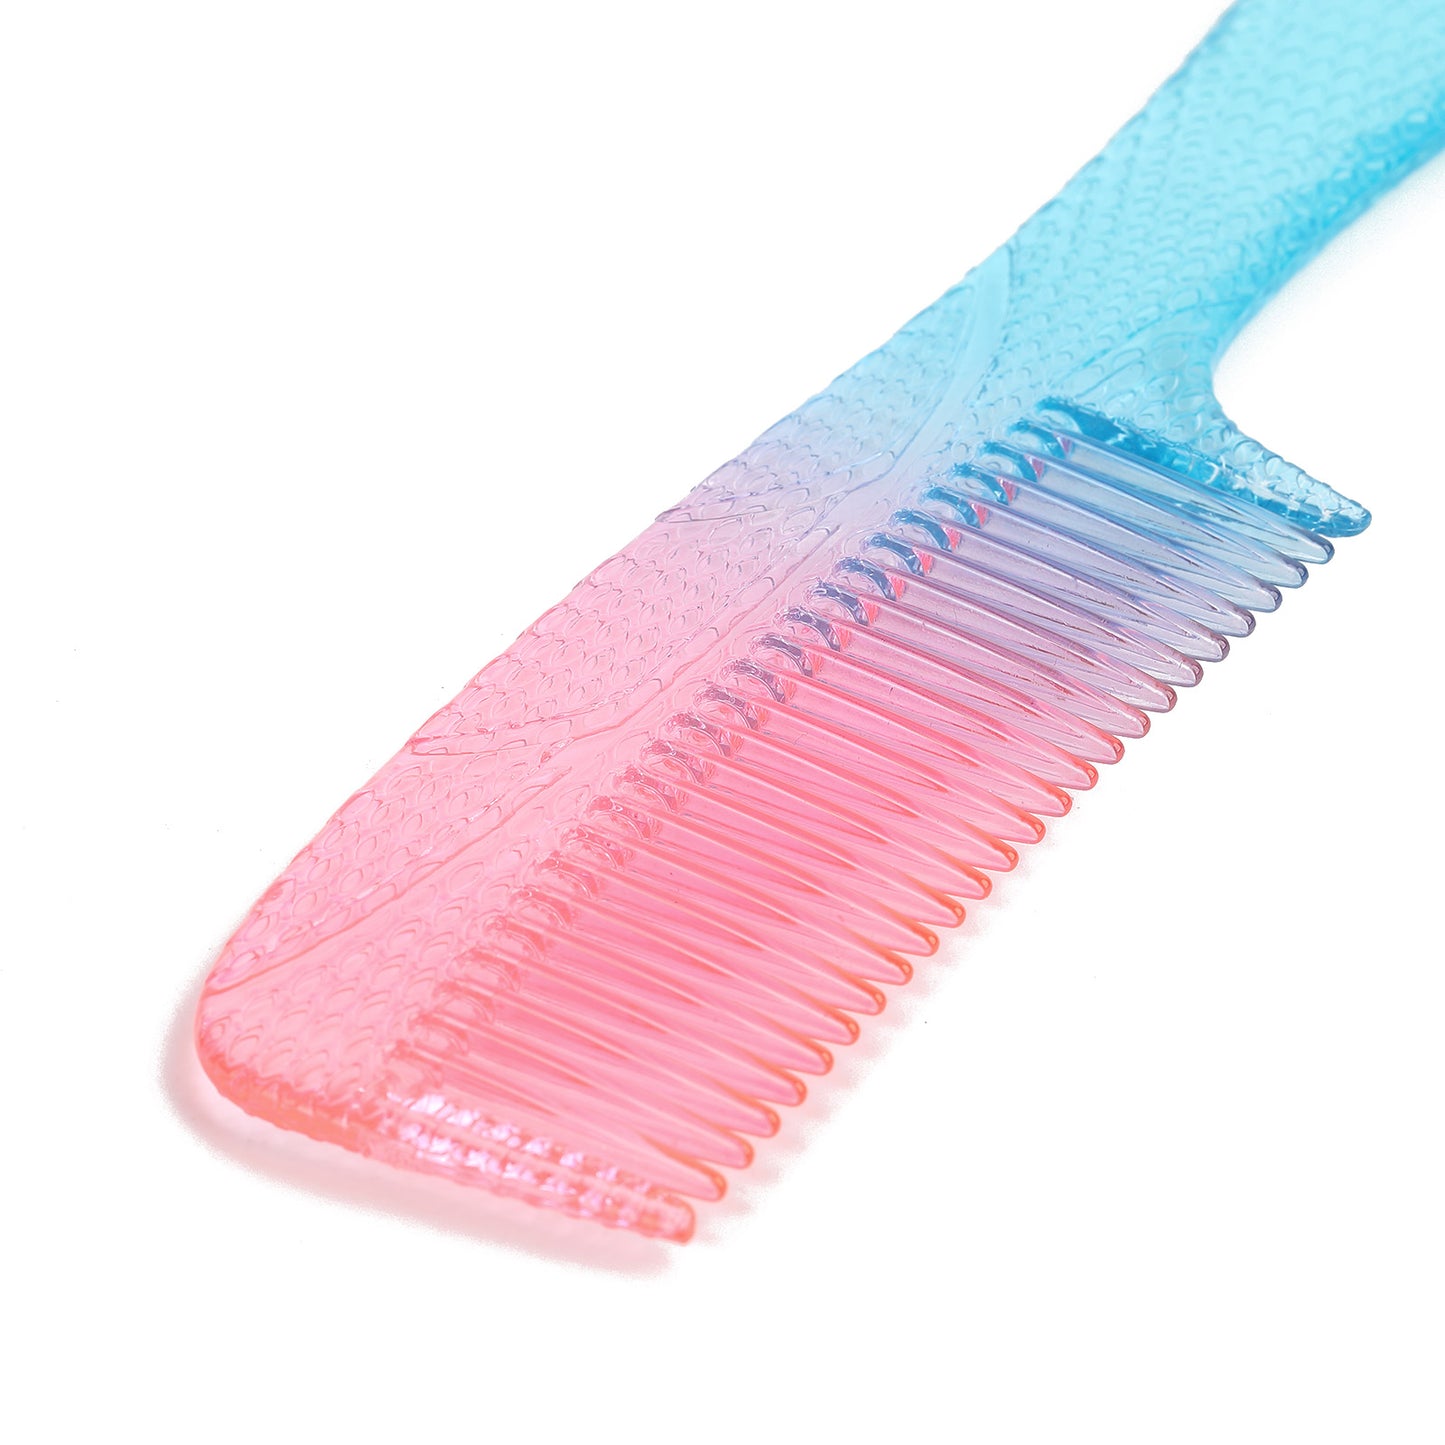 Wide Tooth Comb for Women Curly Wet Hair Comb Colorful Gradient Men Girls Long Short Thick Fine Hair Curls Detangling Hair Combs Fashion Popular Styling Large